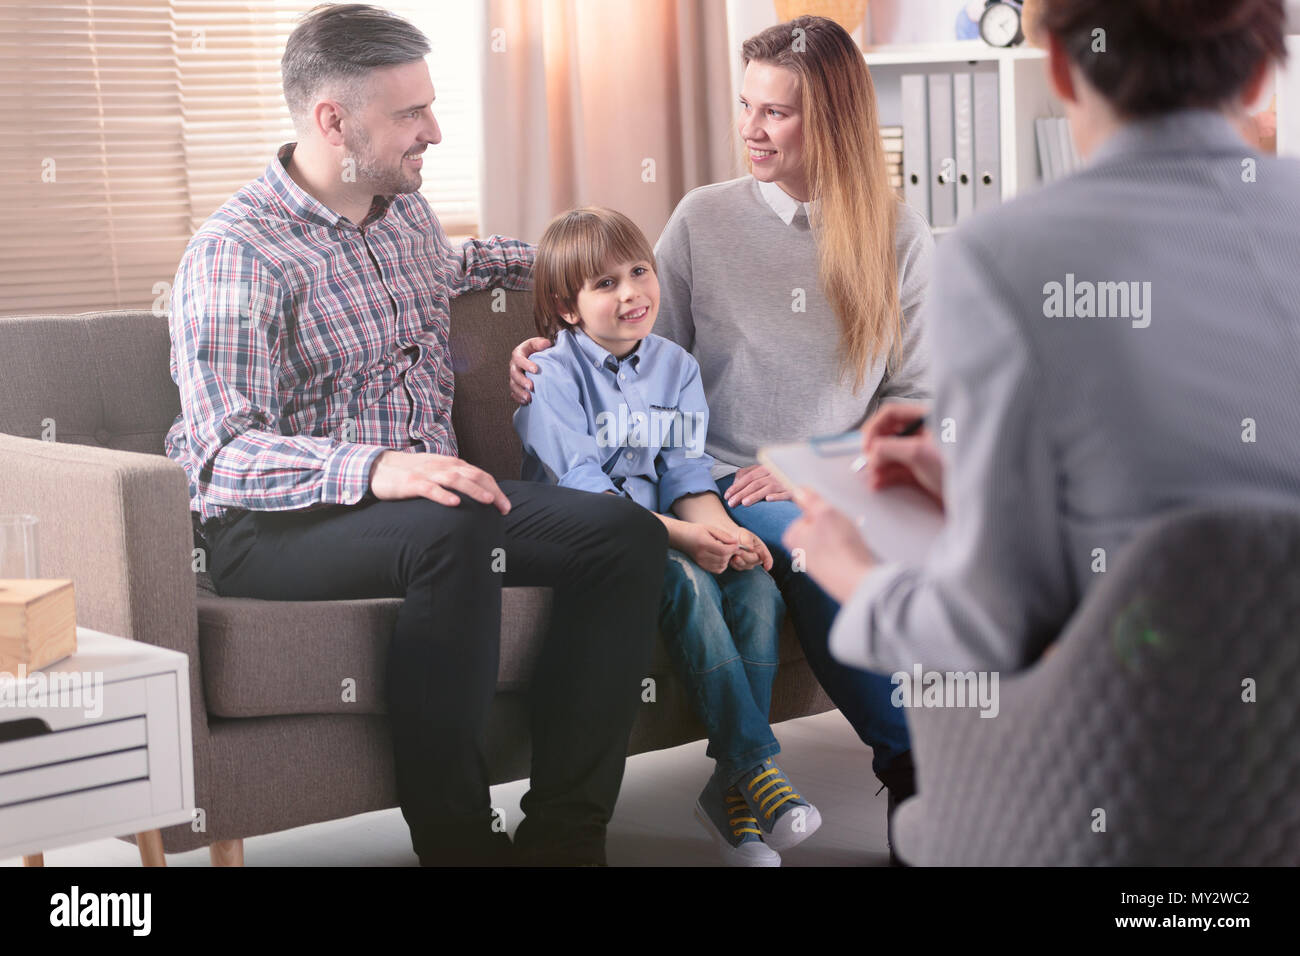 Rear view at successful female psychotherapist helping young family with a child to solve problems in relationship. Happy family in the background Stock Photo